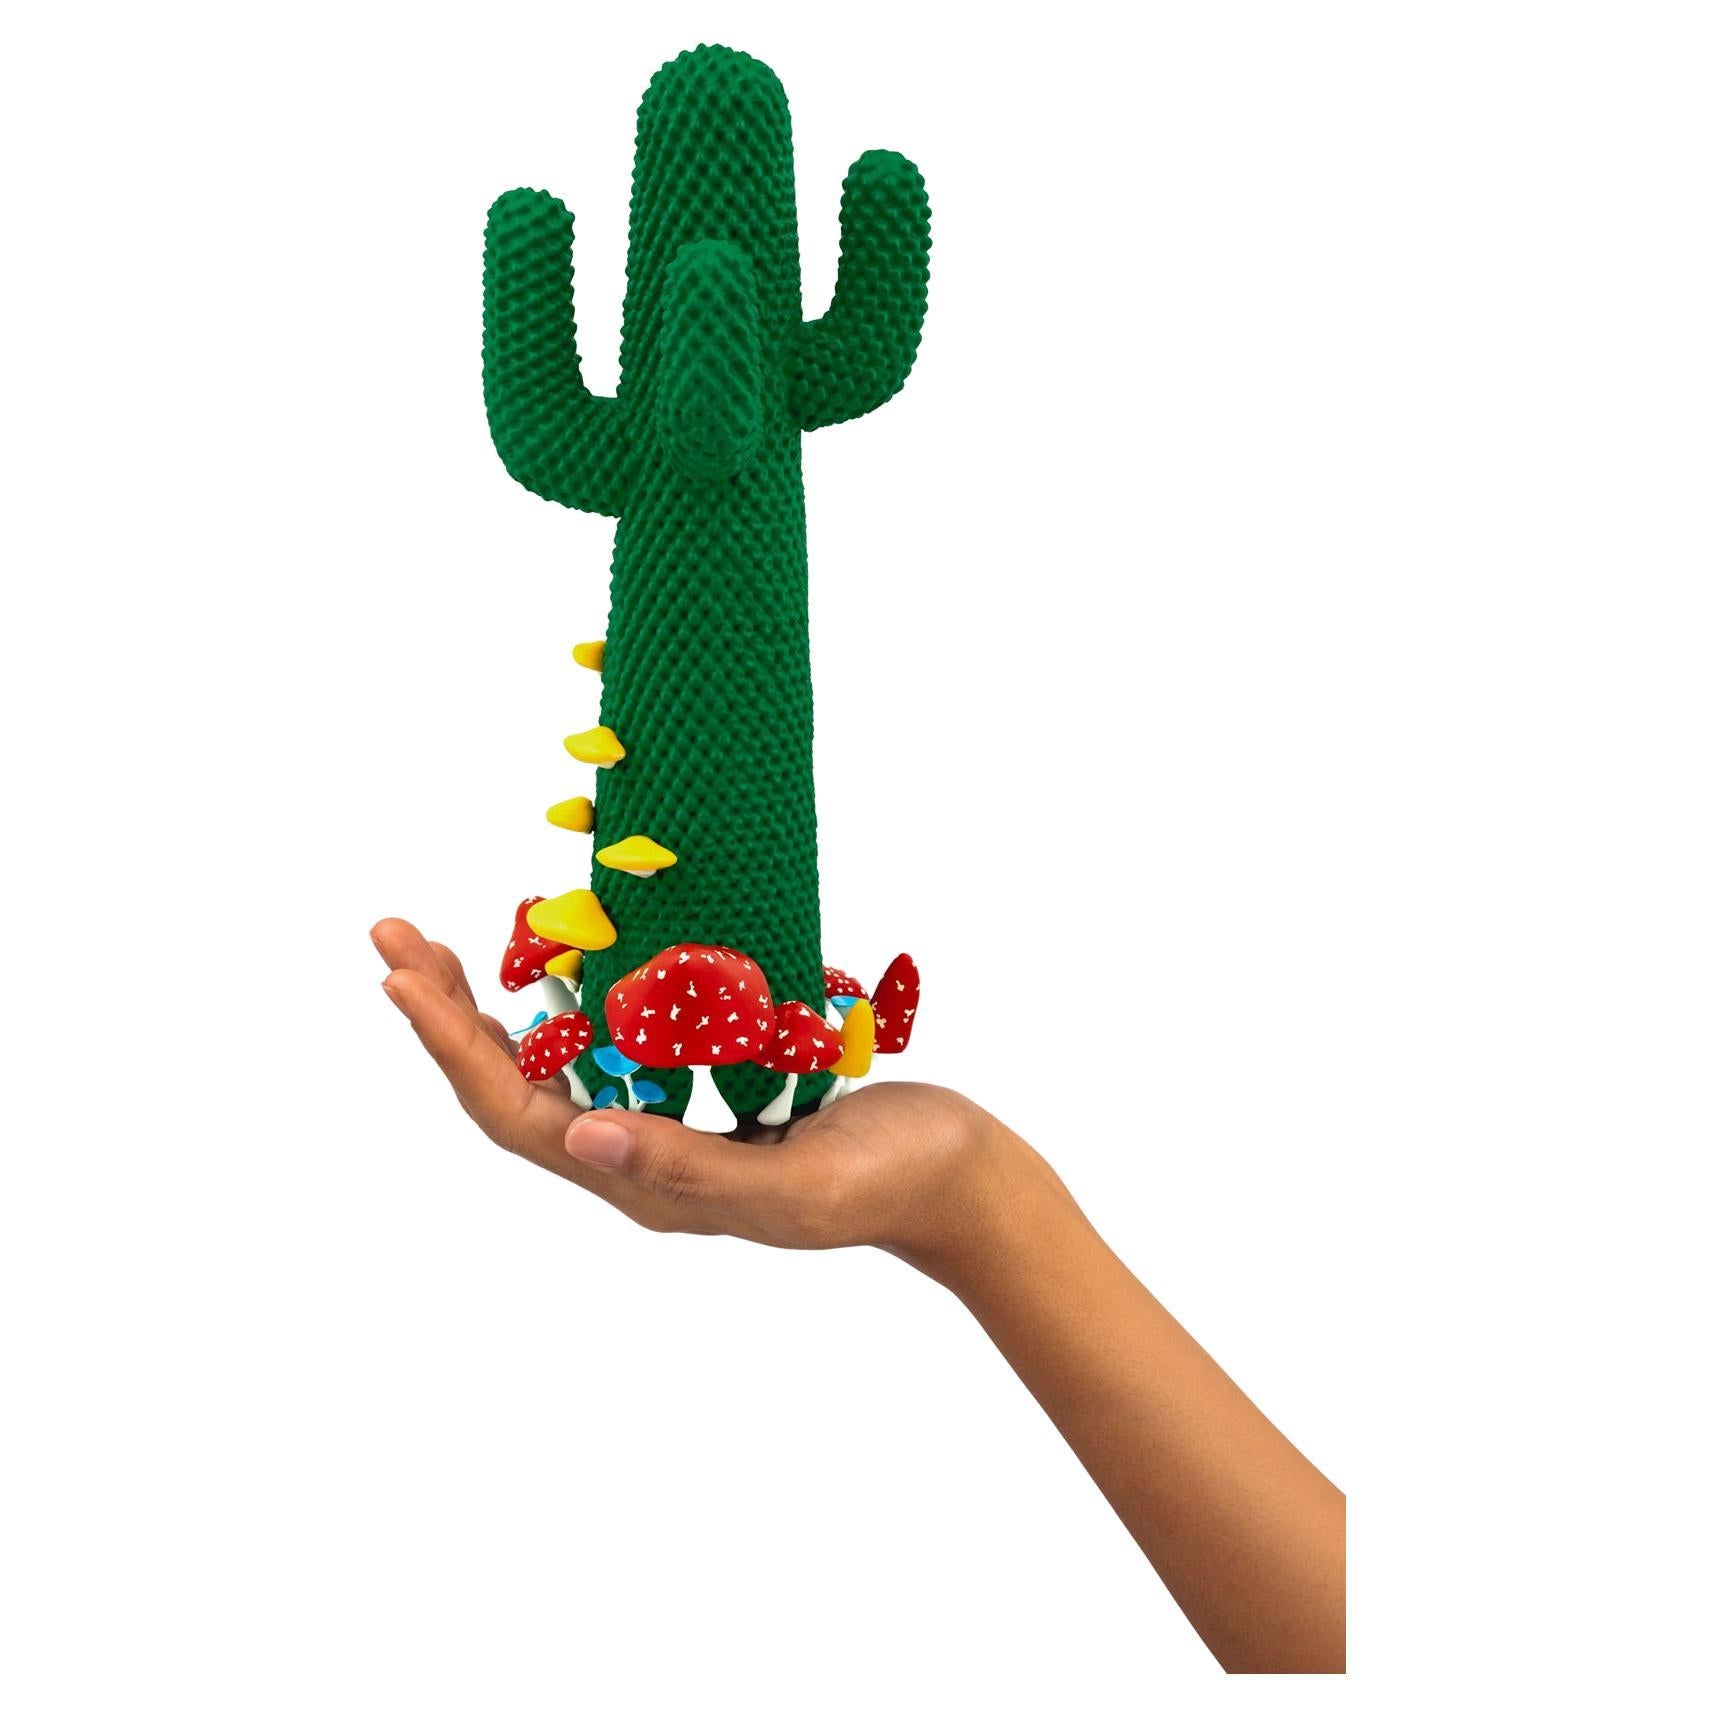 LIMITED EDITION #36/99

Gufram presents the miniaturised version of the Shroom CACTUS® created in collaboration with A$AP Rocky and the artist’s new design studio HOMMEMADE Exactly as the real-size Shroom CACTUS®, the new Guframini piece features